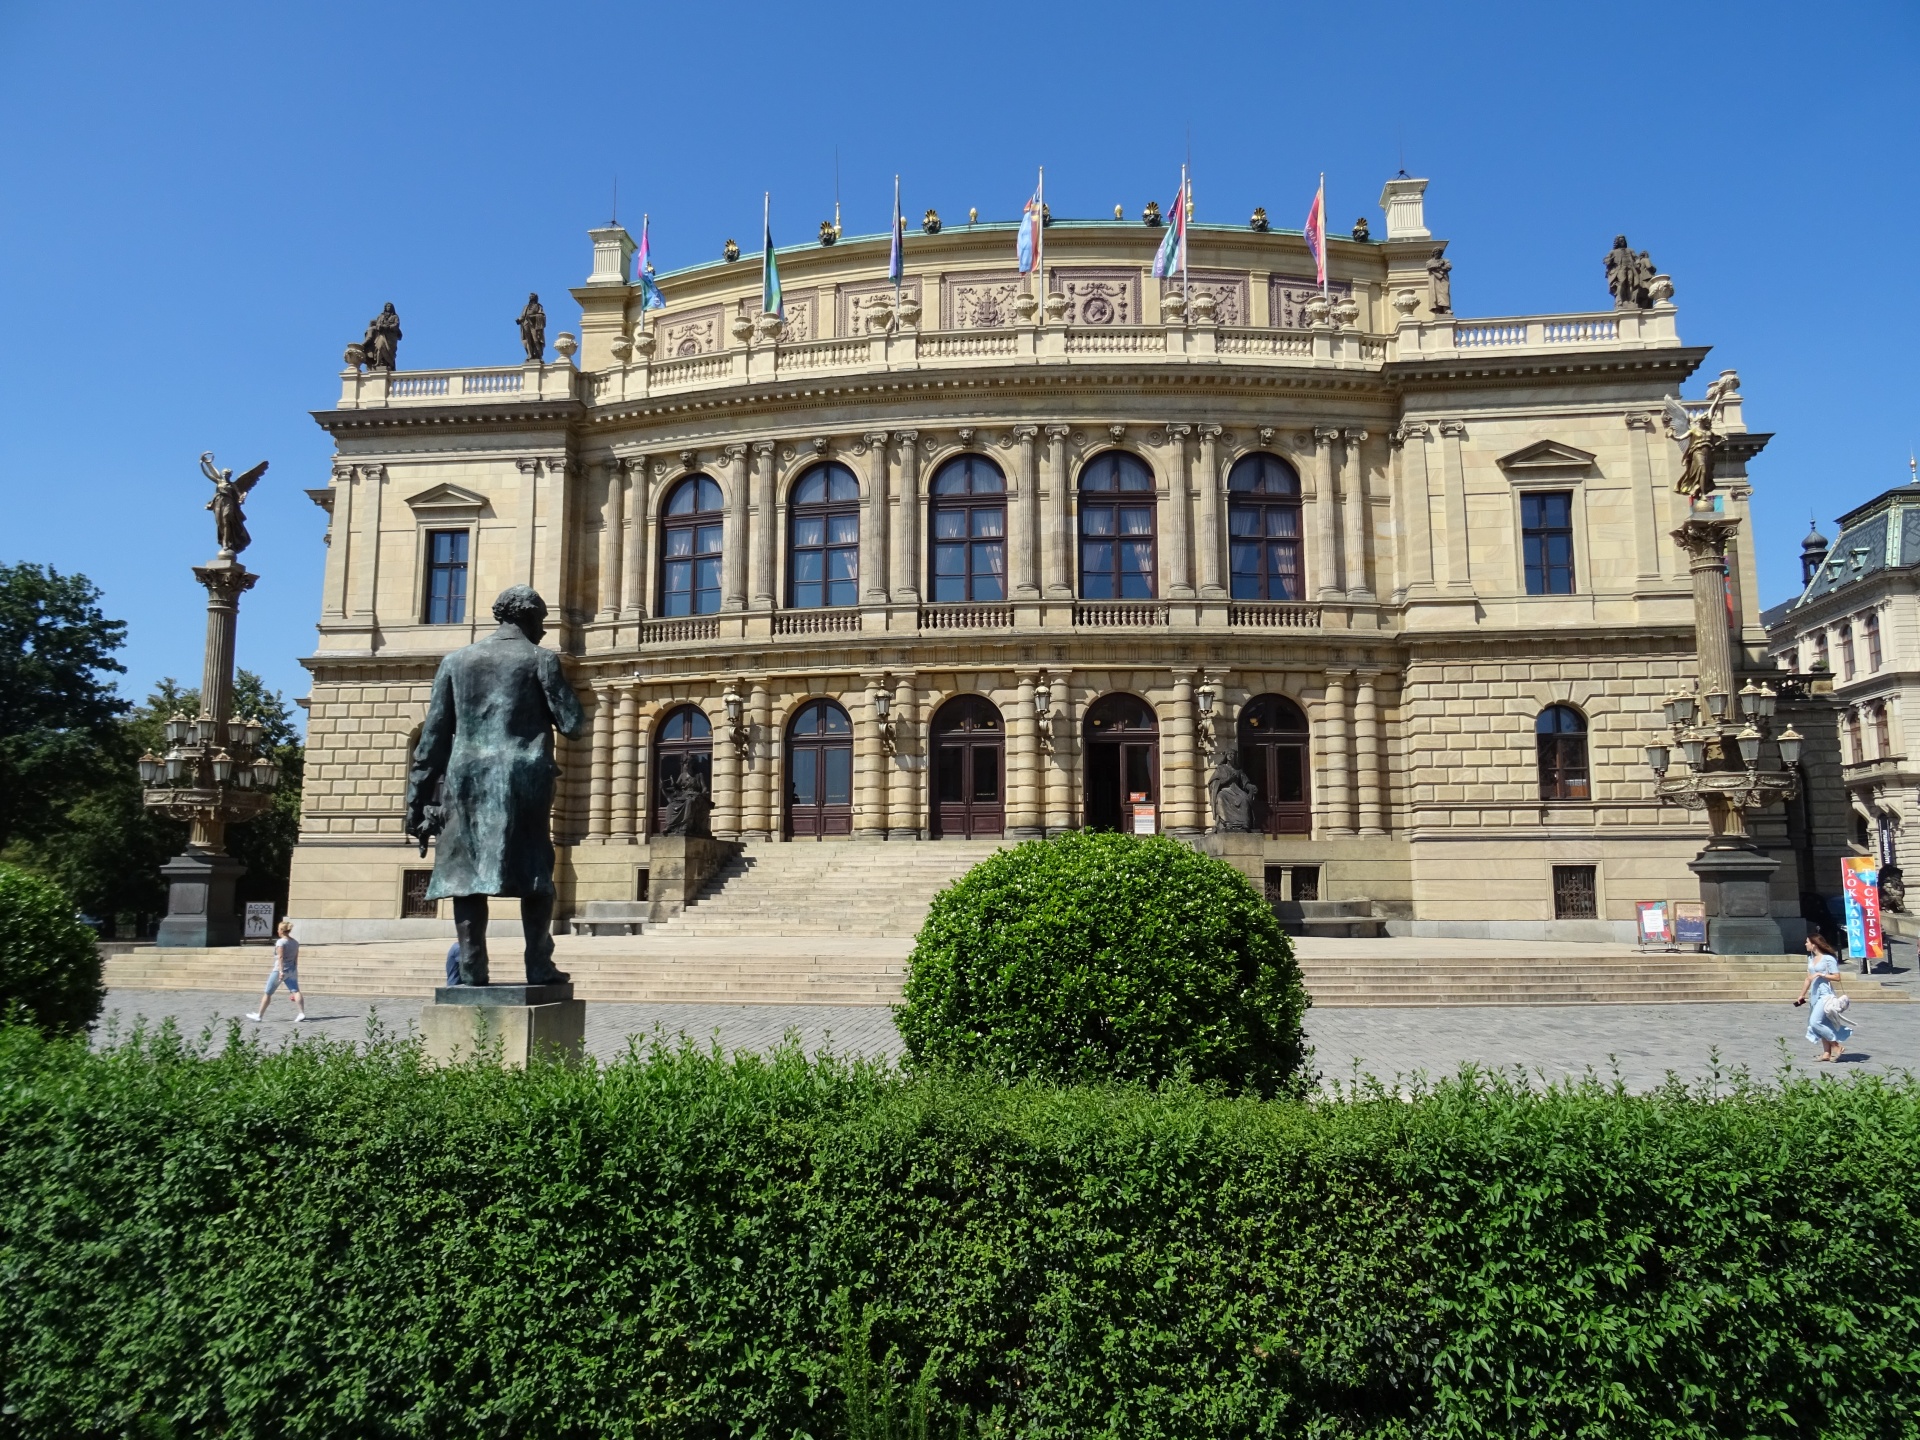 Neo-renaissance building on Palachs square in Prague, now it is home of Philharmonic orchestra and art gallery.